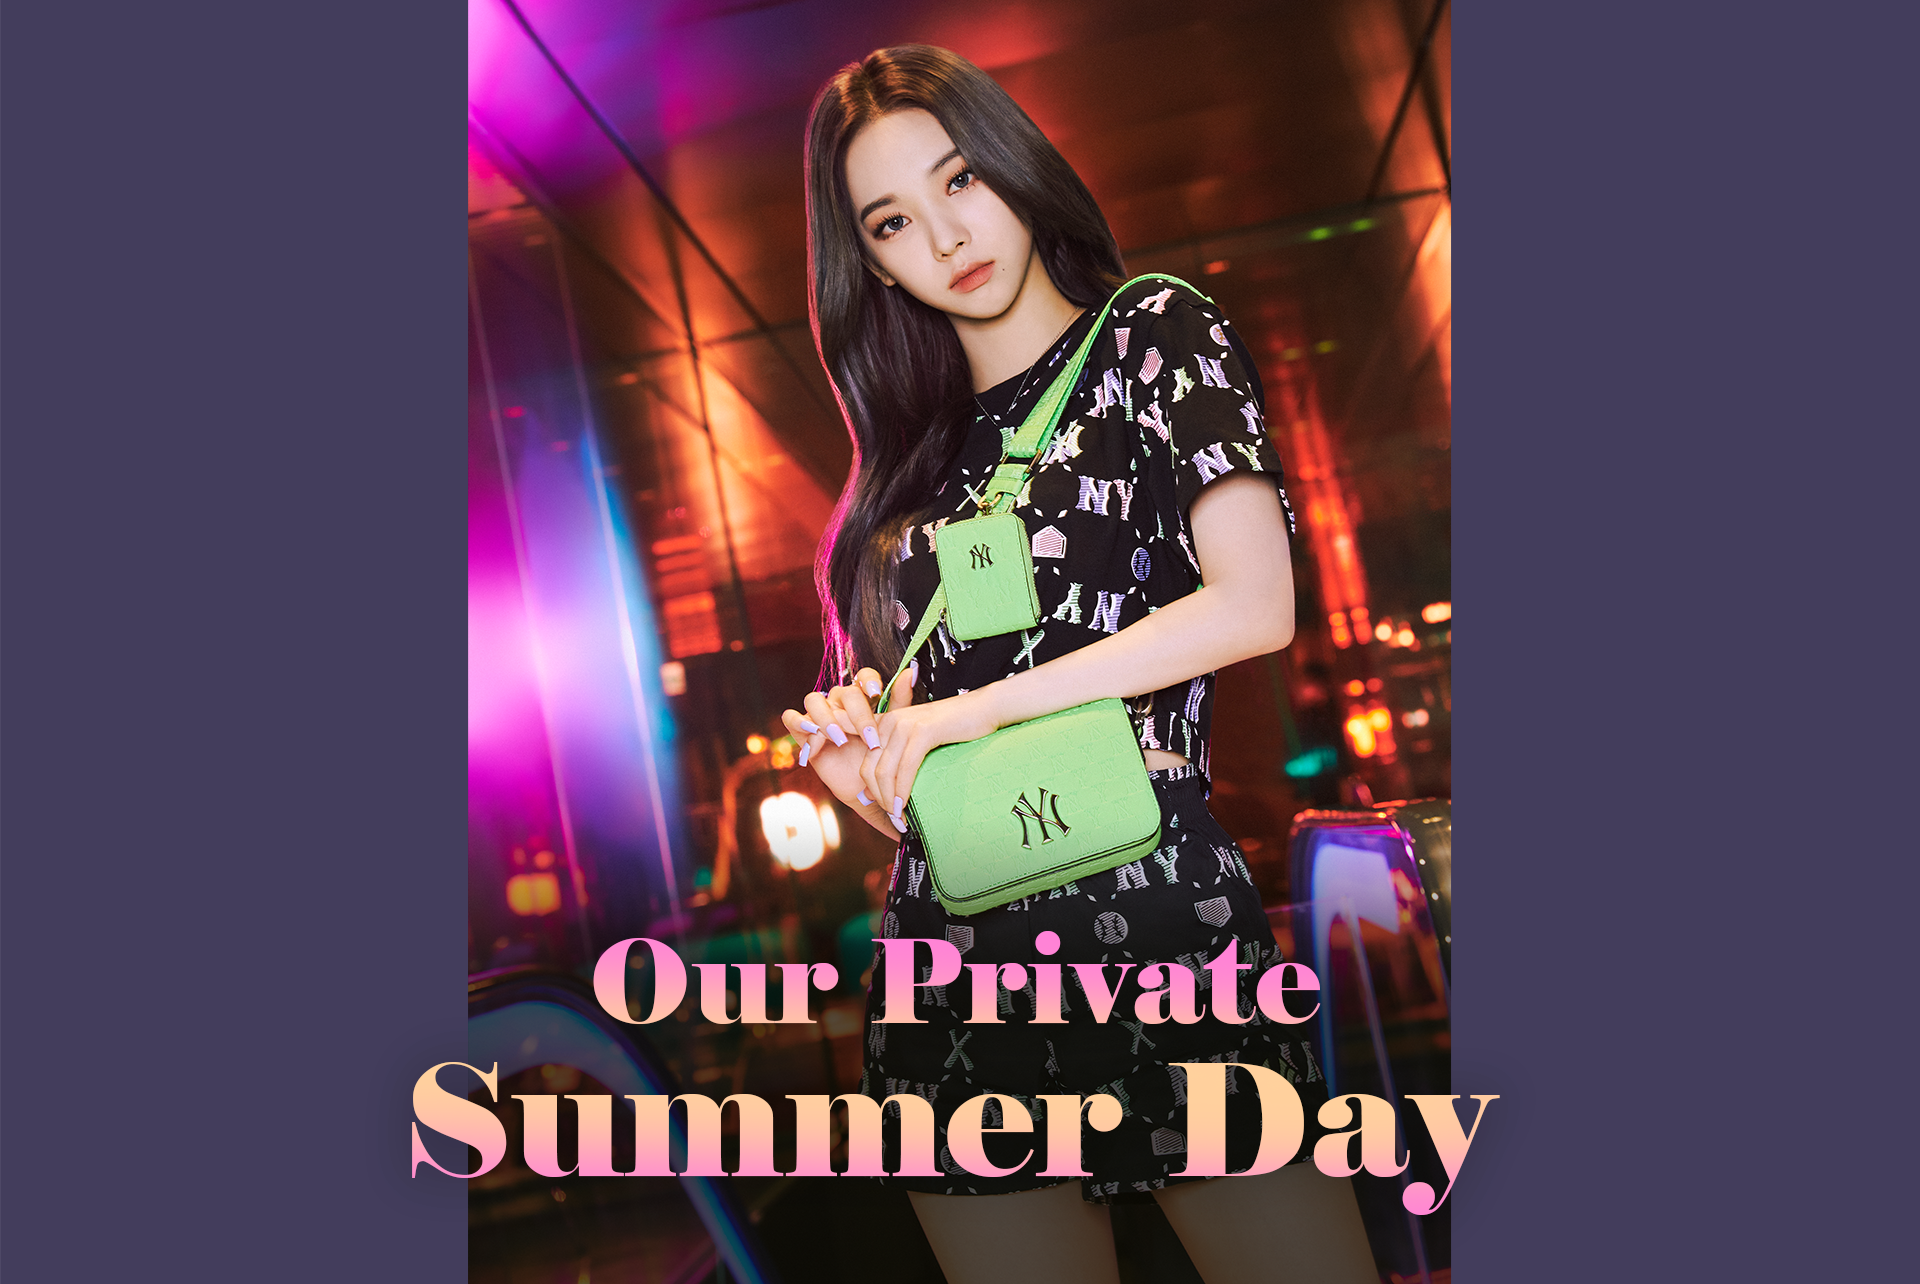 Our Private Summer Day